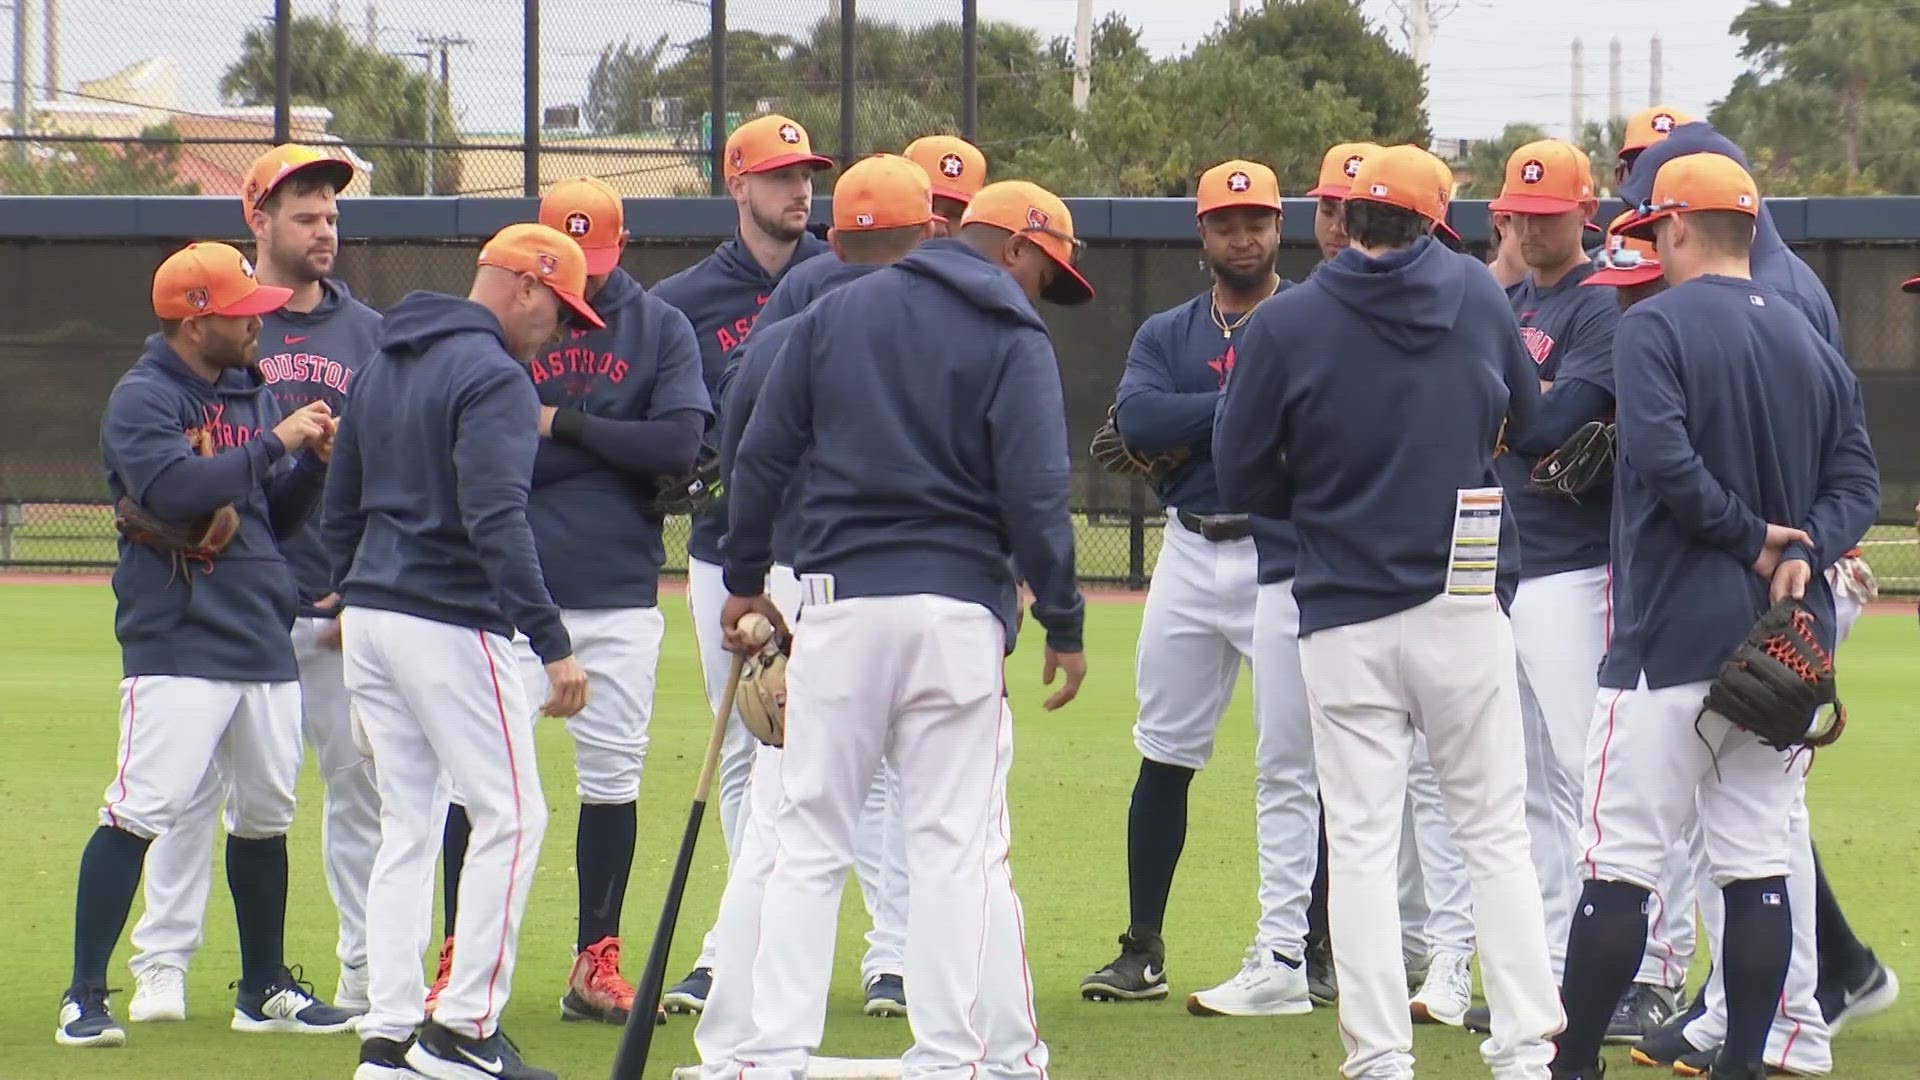 On a cool Wednesday morning, new manager Joe Espada set the stage for what should ba another sizzling summer of Astros baseball.